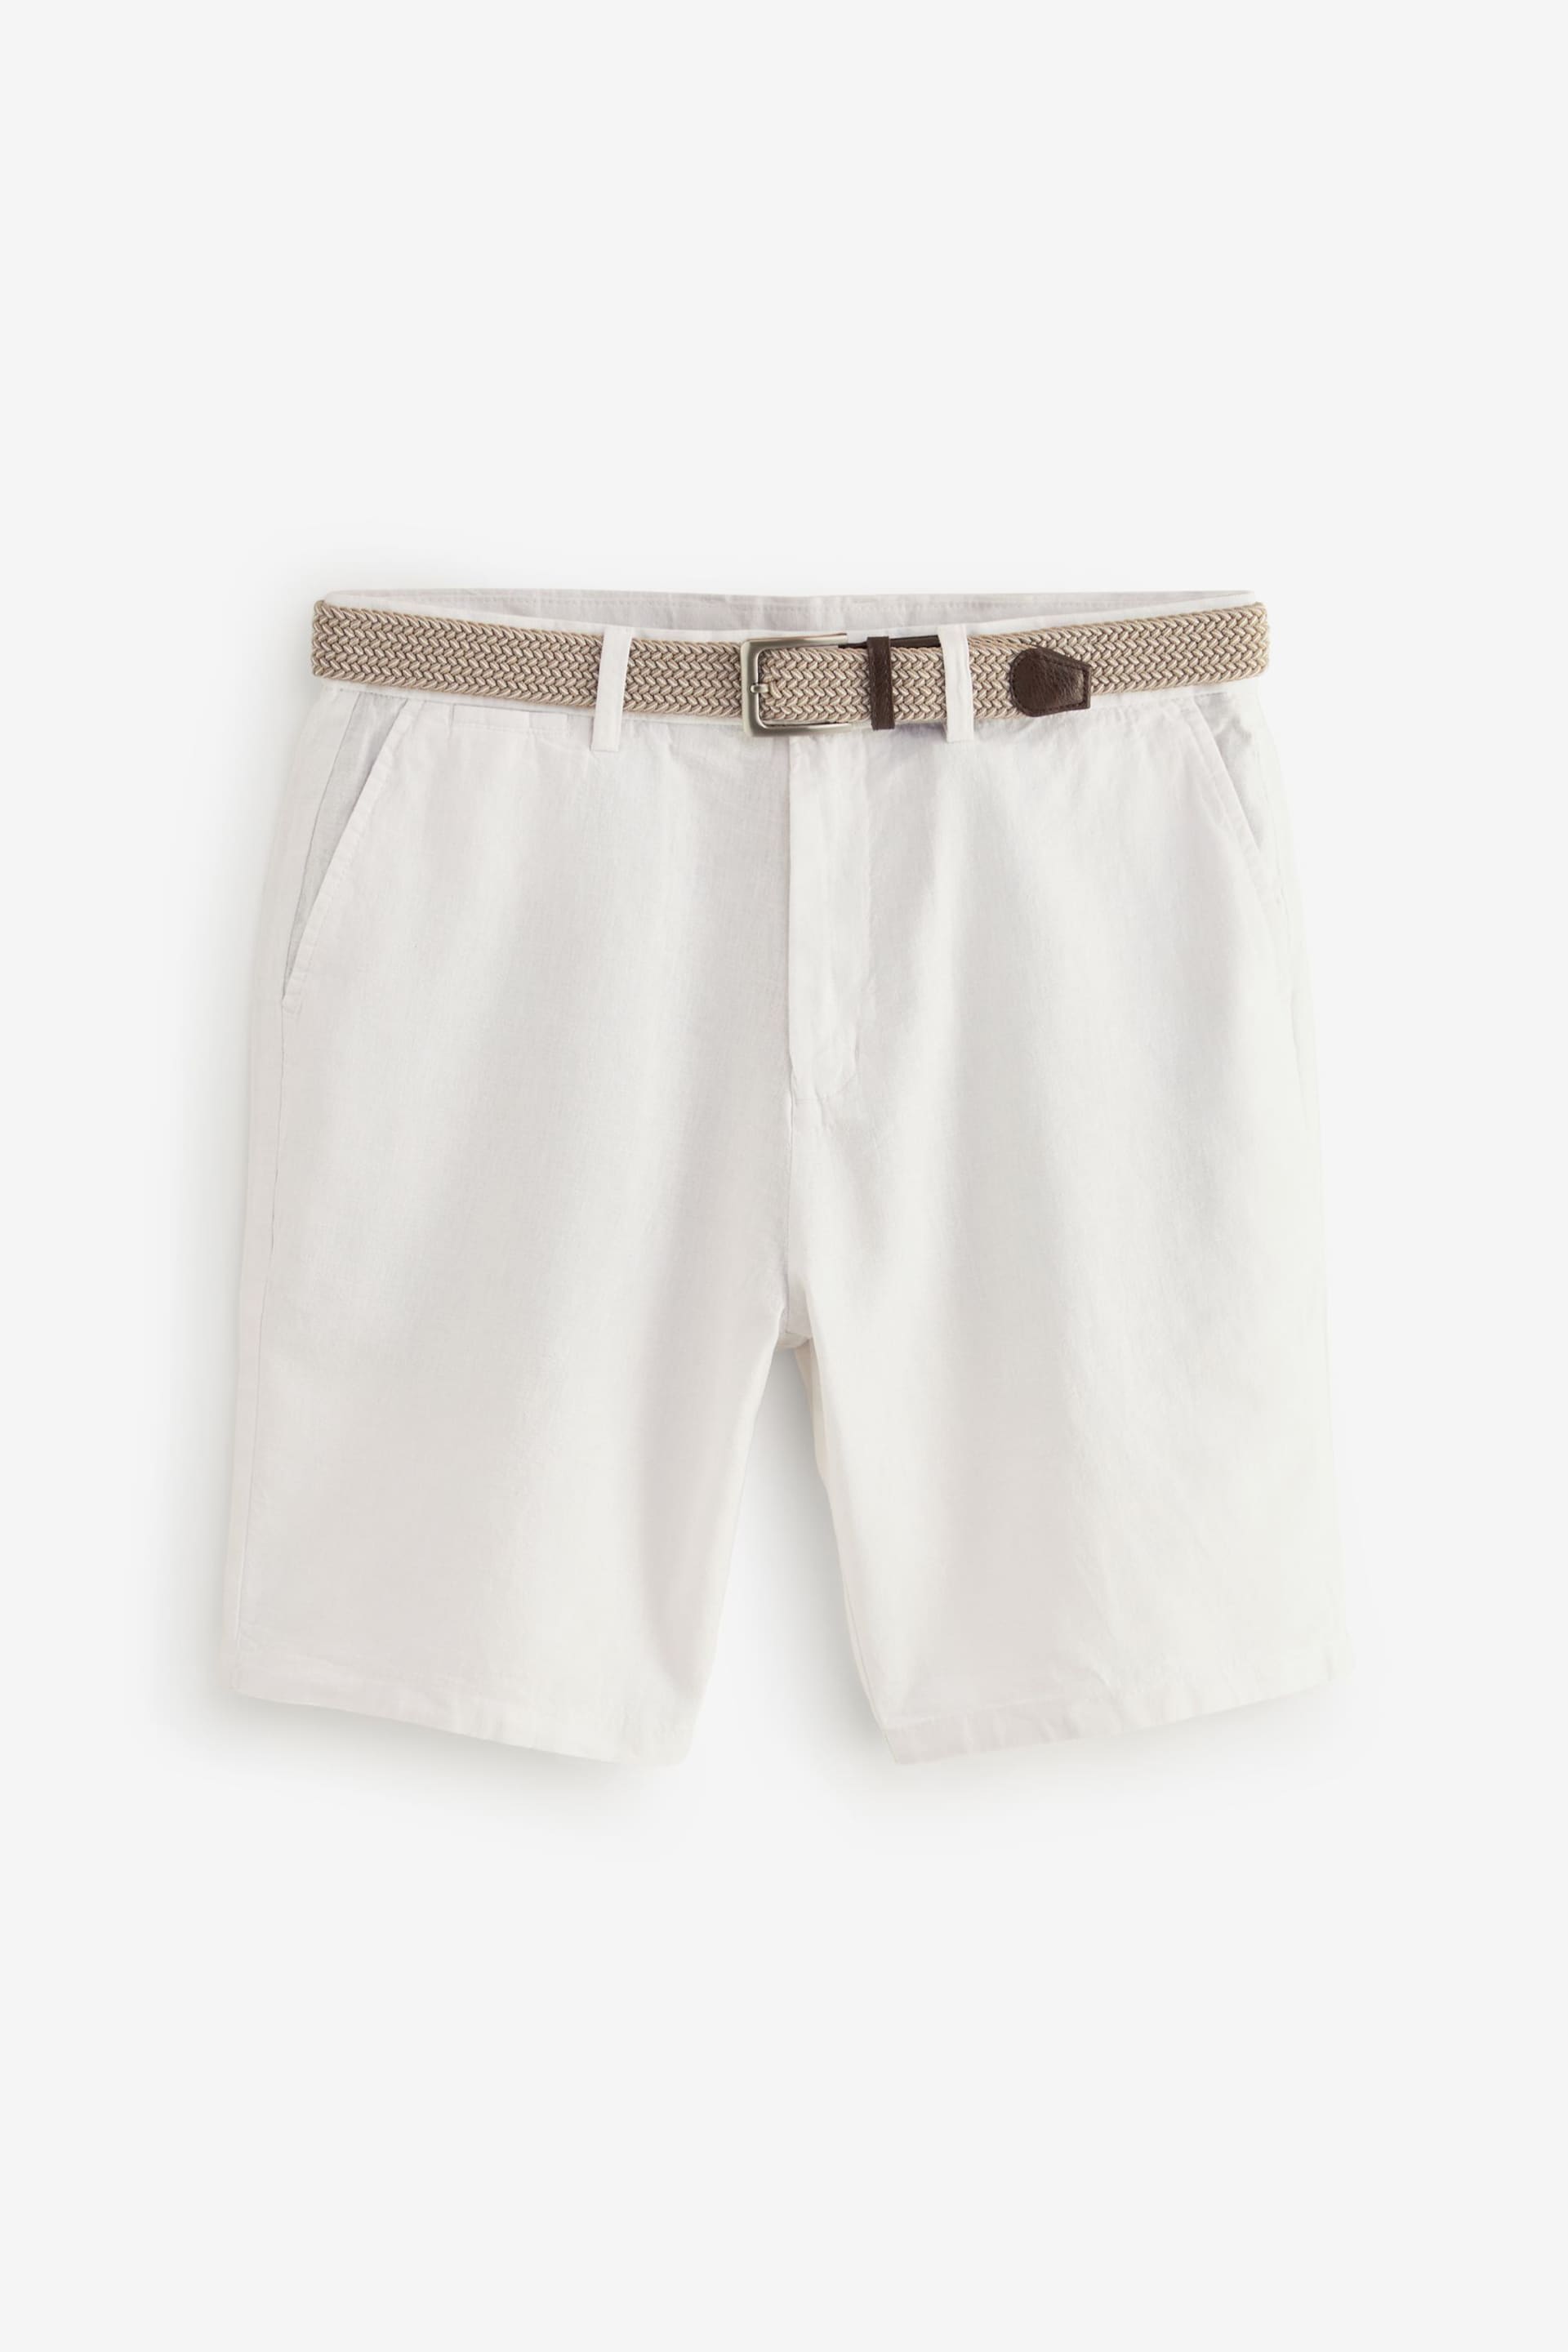 White Linen Cotton Chino Shorts with Belt Included - Image 5 of 7